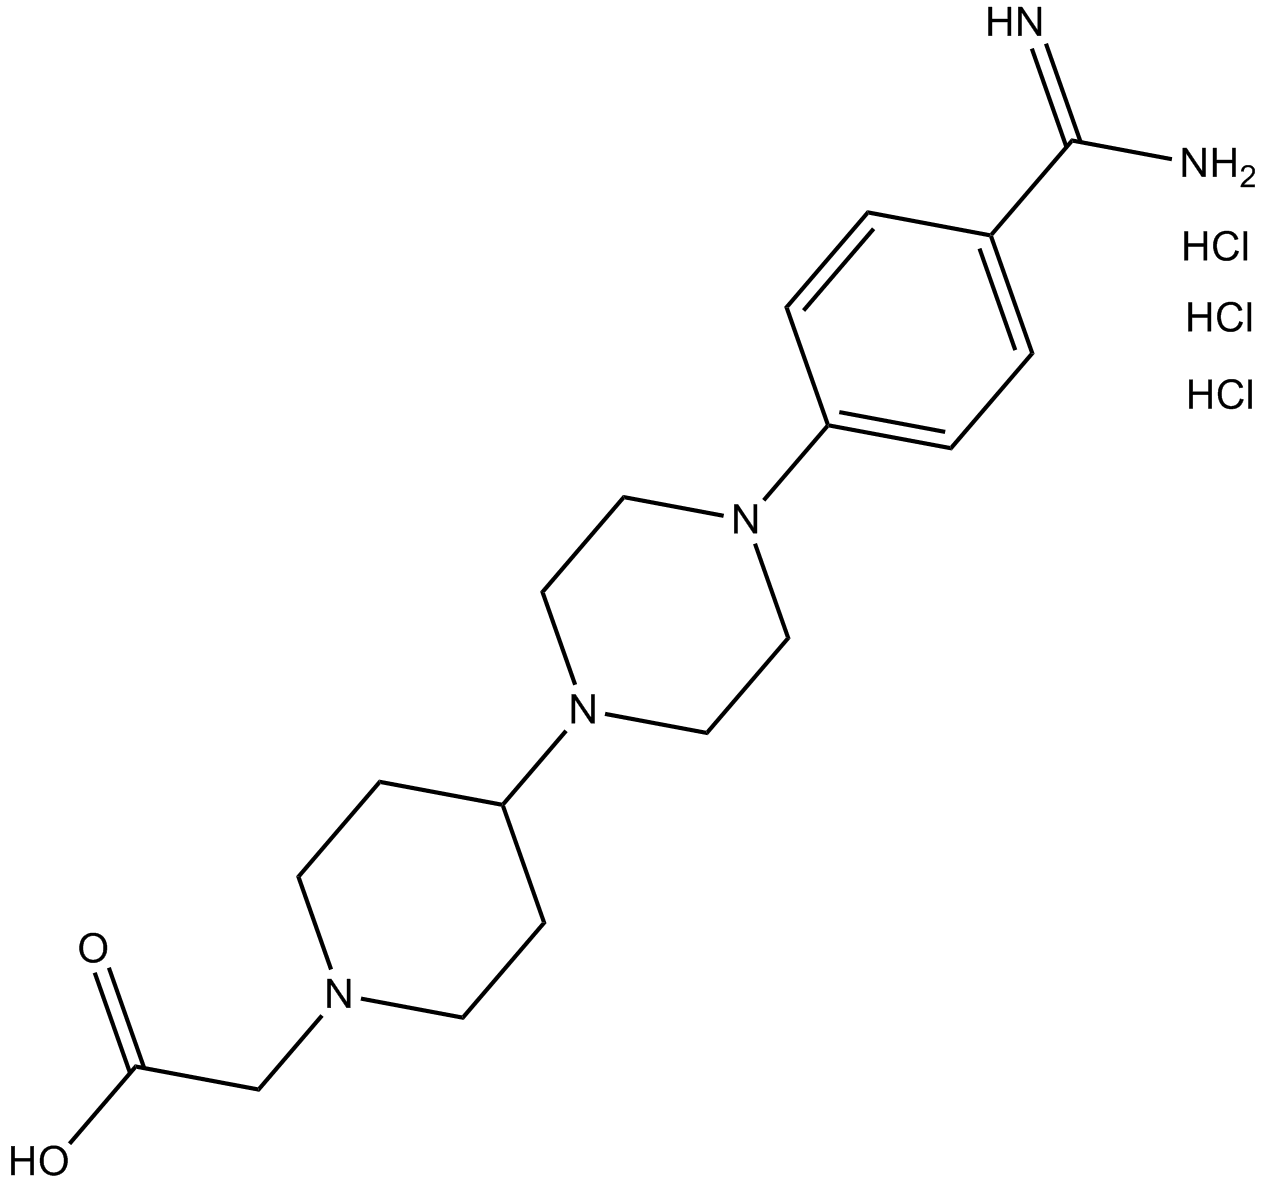 GR 144053 trihydrochloride  Chemical Structure